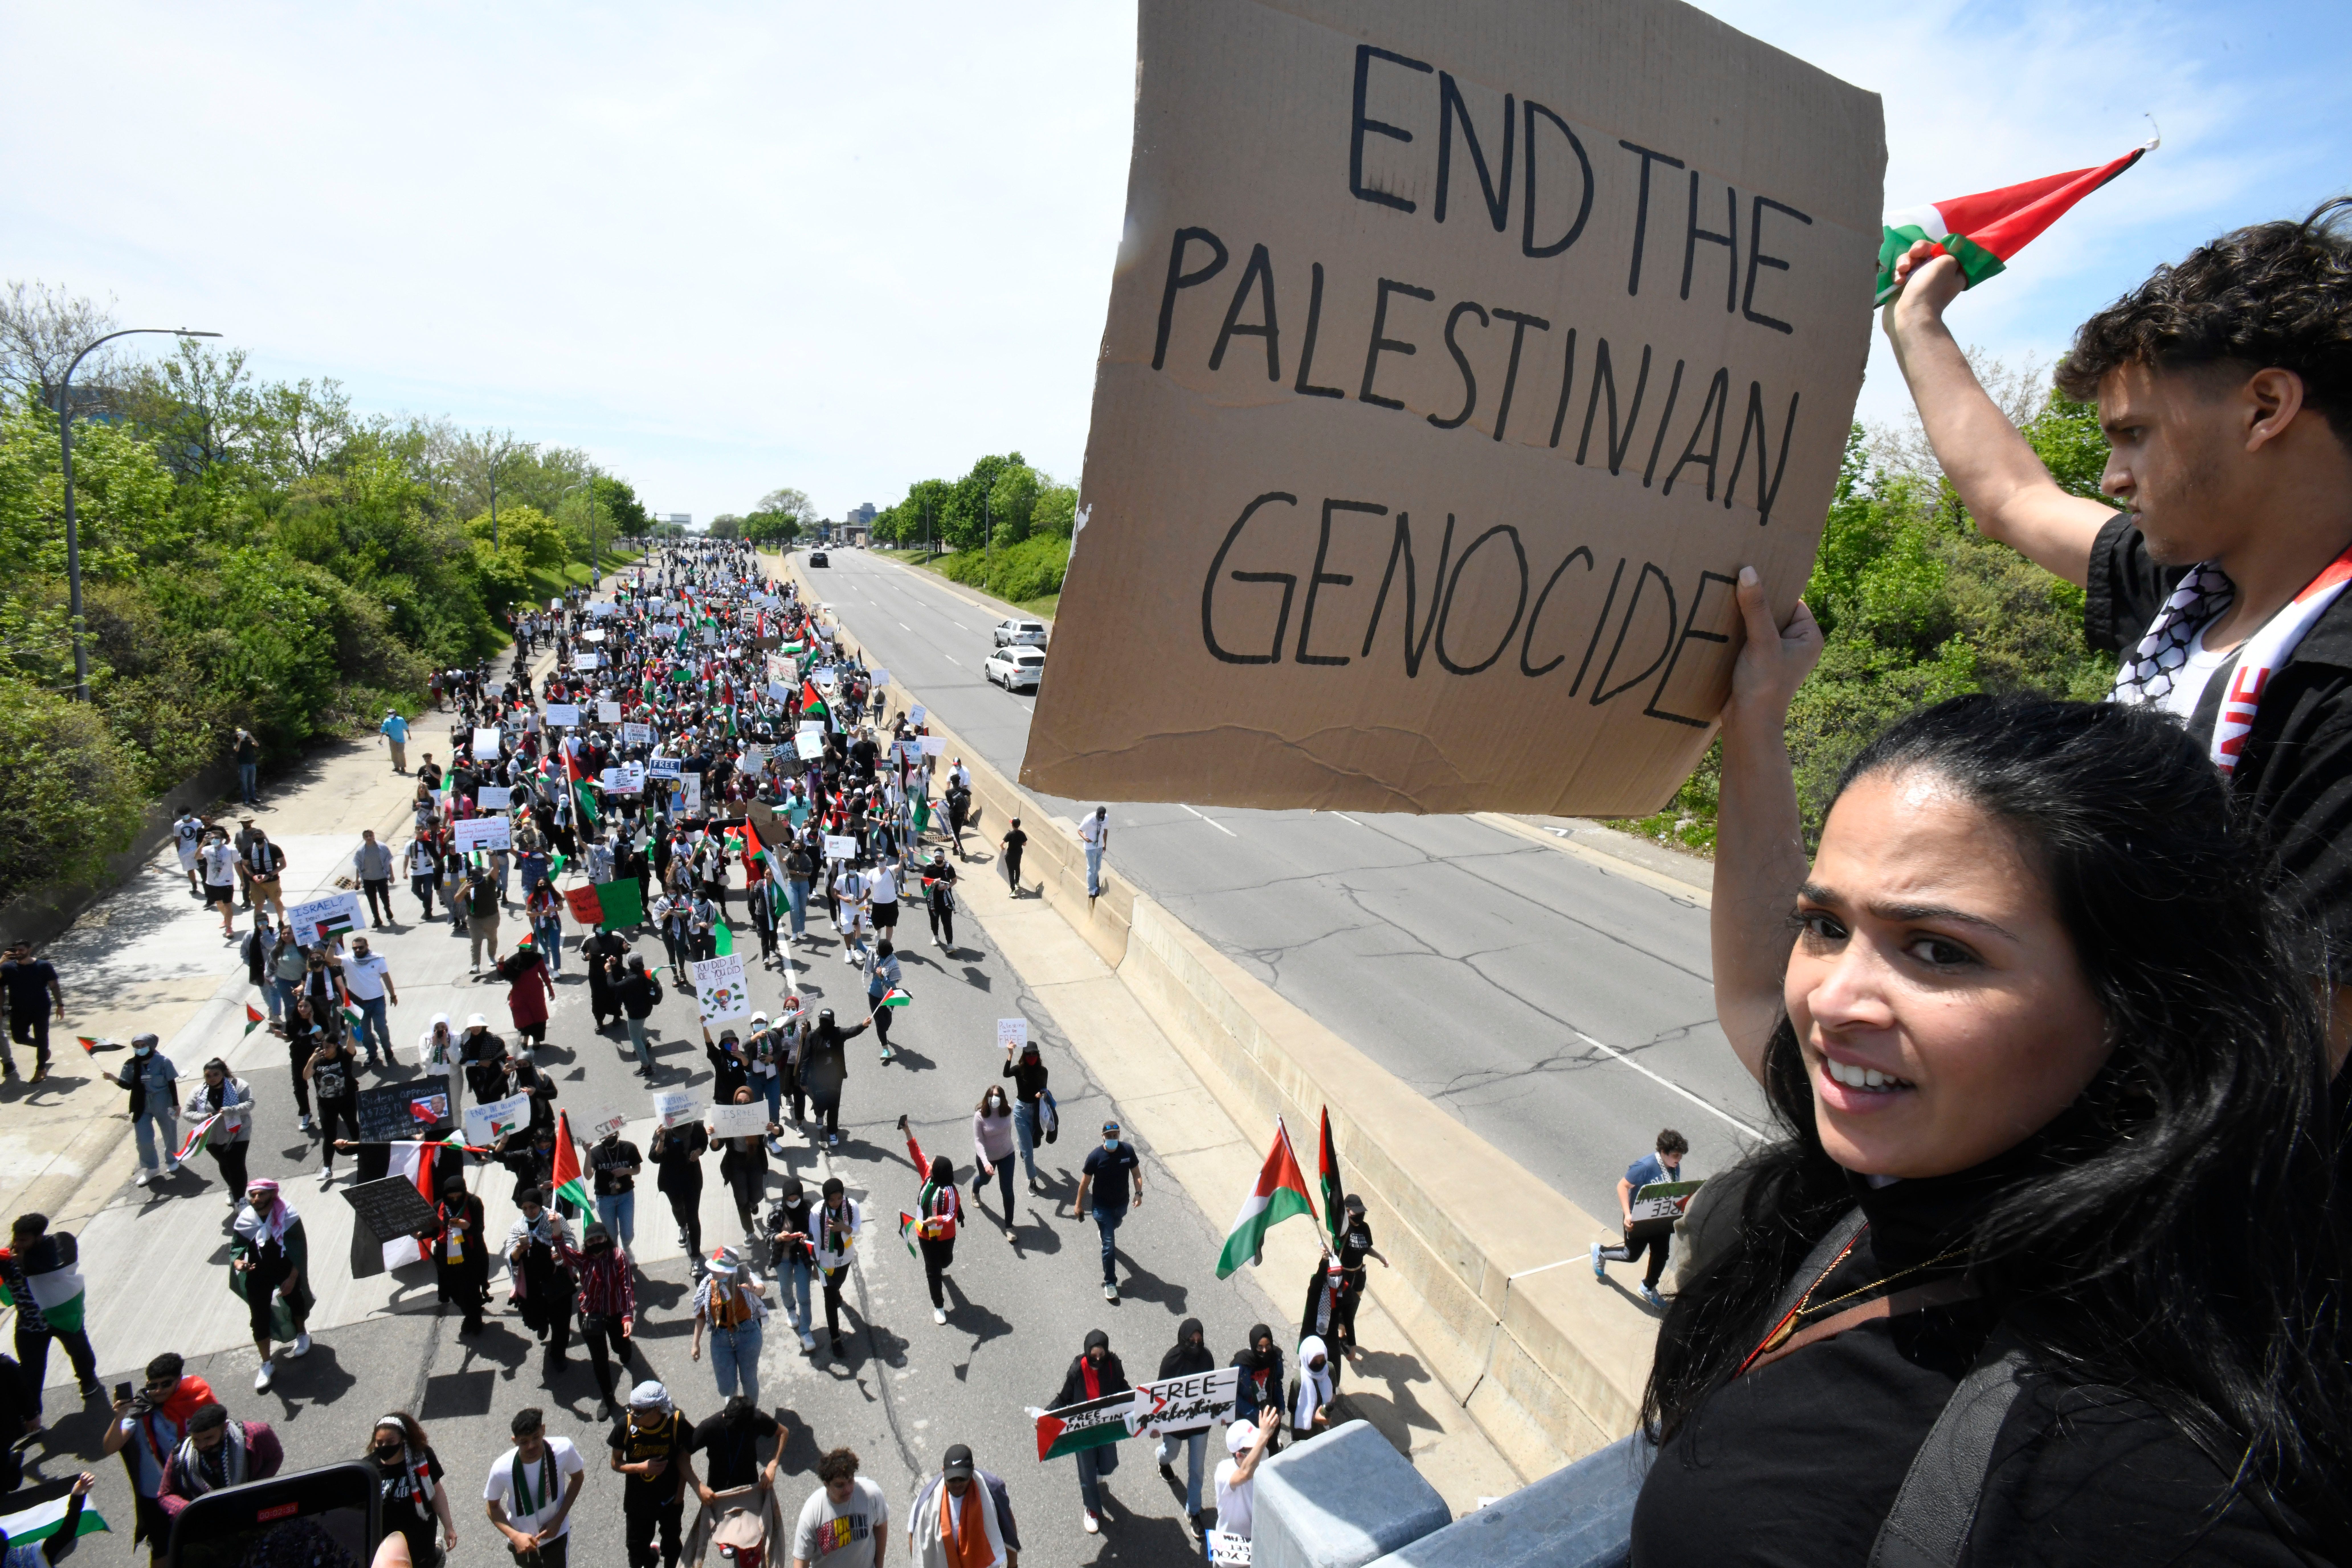 Shema Aman shows her support from an overpass as thousands of Palestinian supporters march down eastbound Michigan Avenue during a Palestinian protest and march, at the same time President Joe Biden is visiting in another part of Dearborn, Michigan on May 18, 2021.